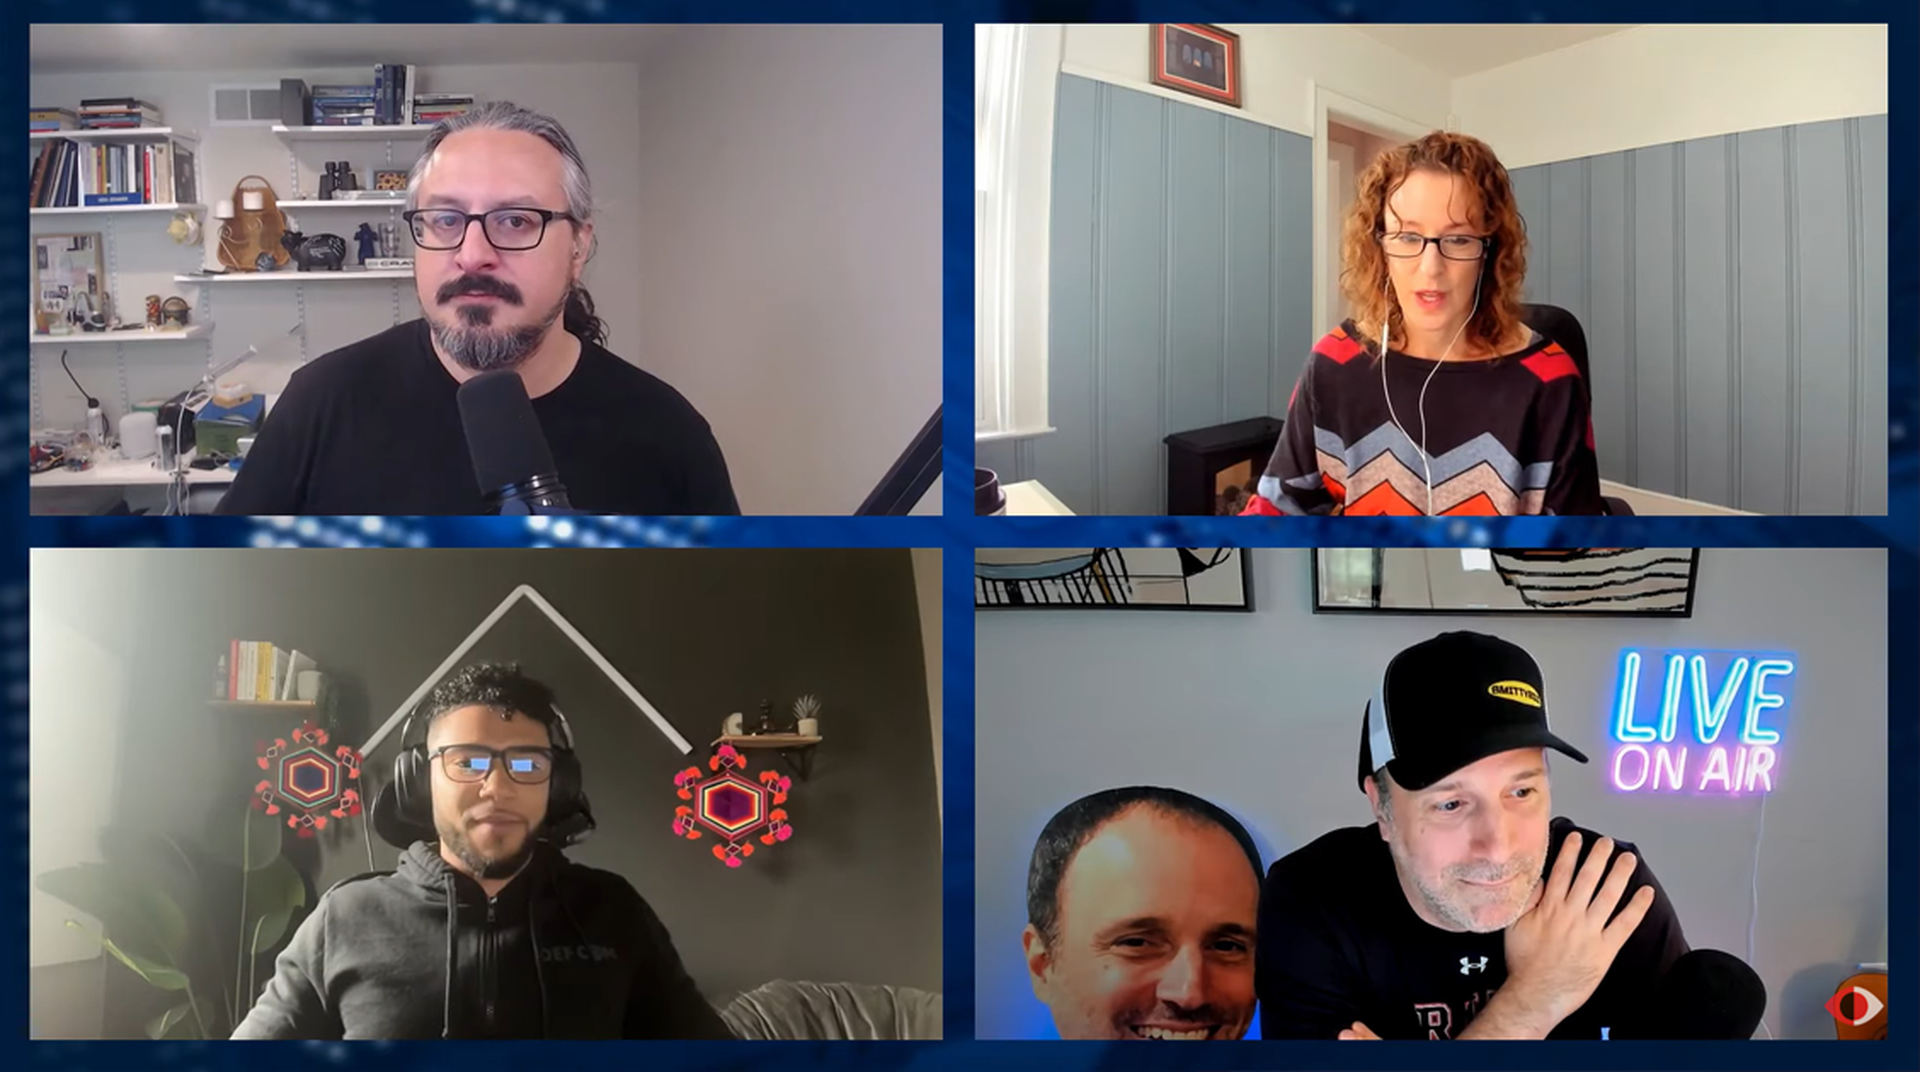 An Enterprise Security Weekly Roundtable on trusting autonomous security products to protect and serve - no humans need apply.